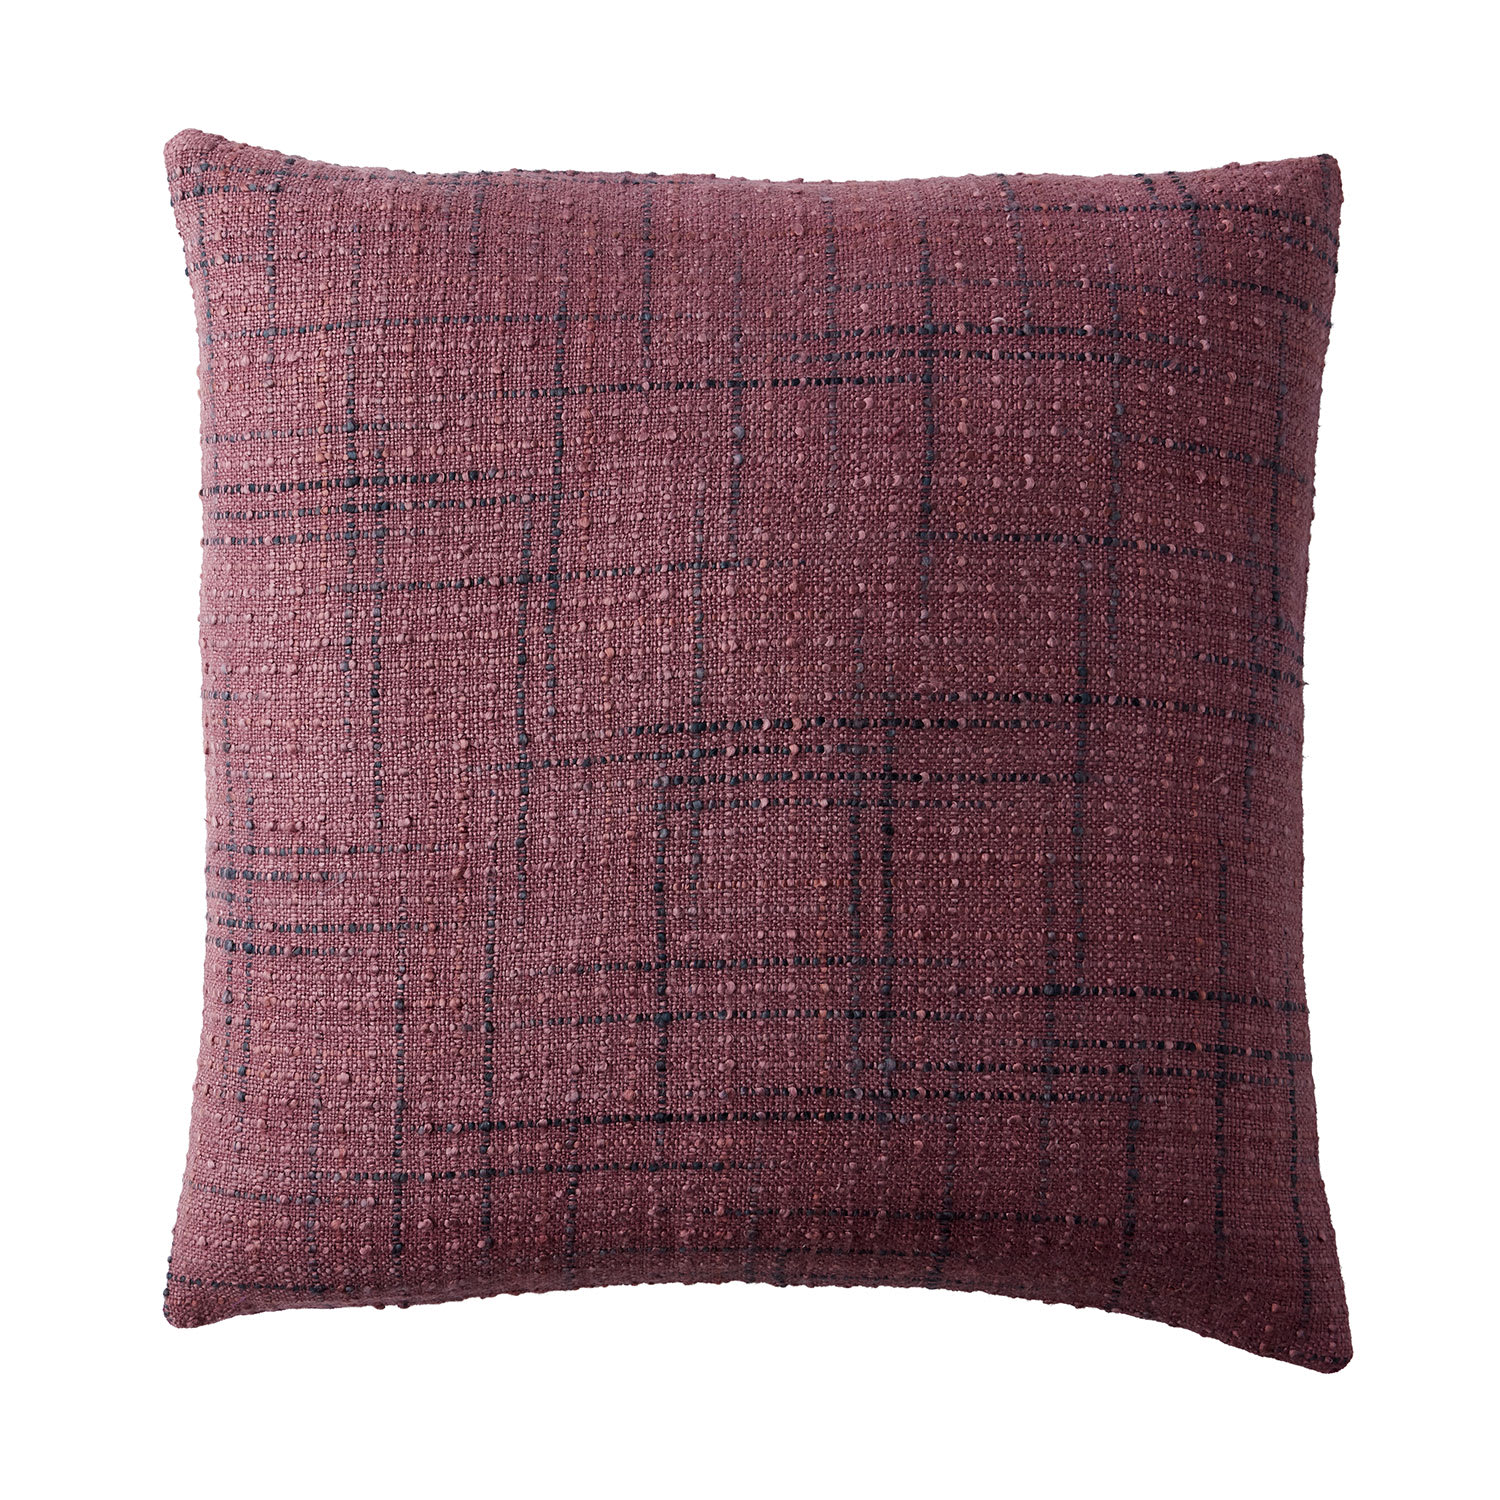 Red Multicolored Squares Embroidered Pillow Cover - Embroidered Squares